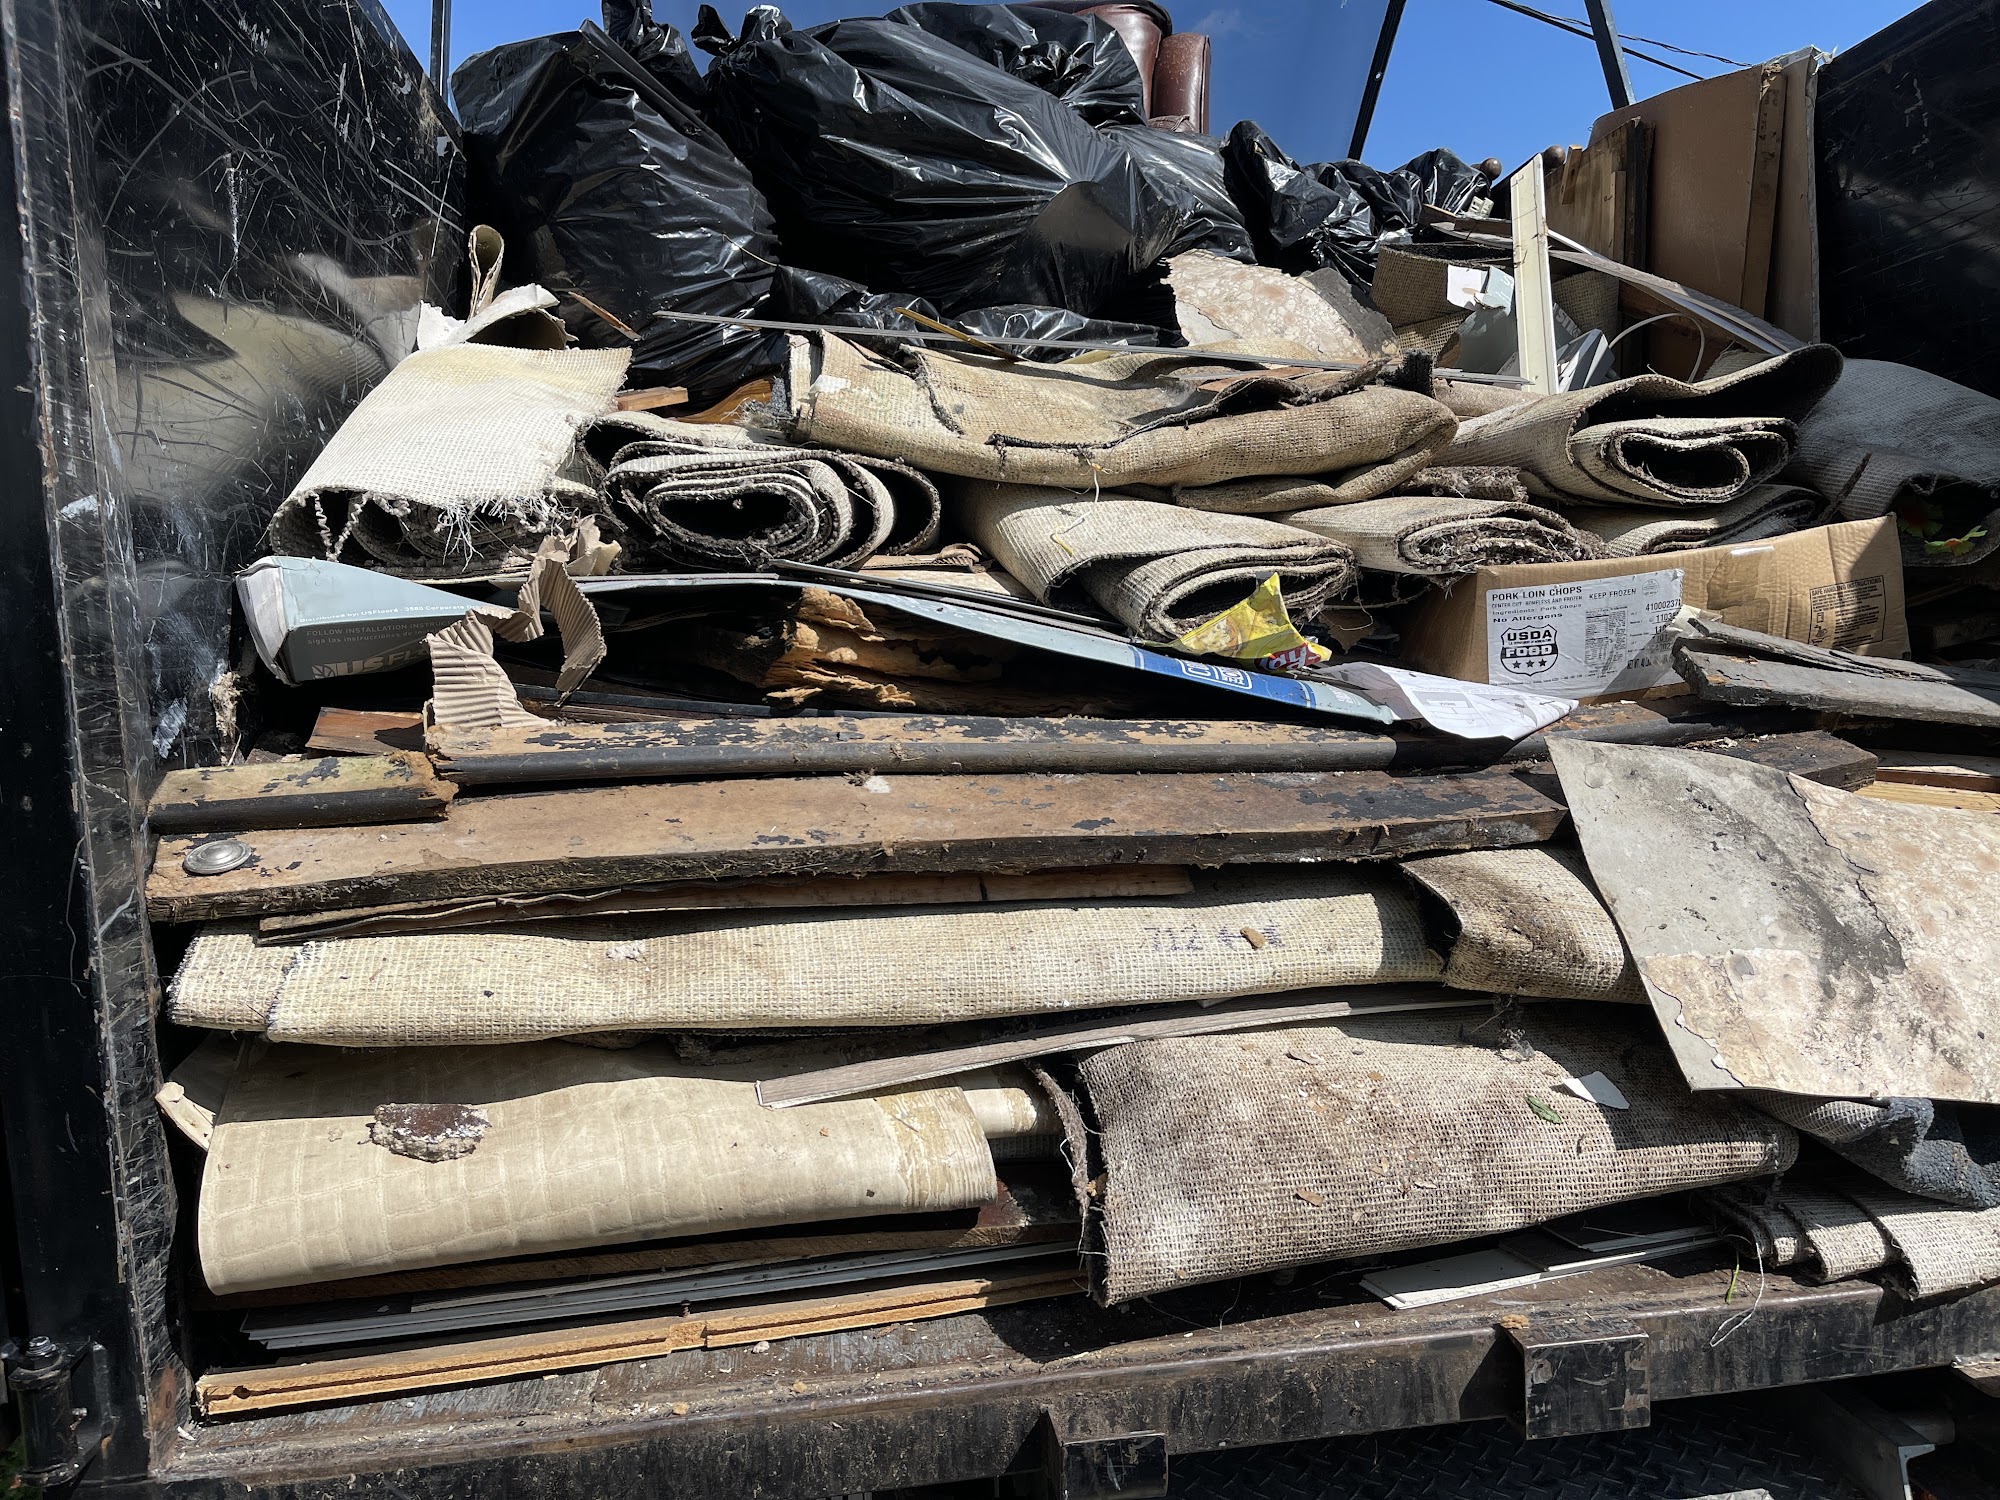 Wyoming Valley Junk Removal & Cleanouts 14 Kennedy Dr, West Wyoming Pennsylvania 18644